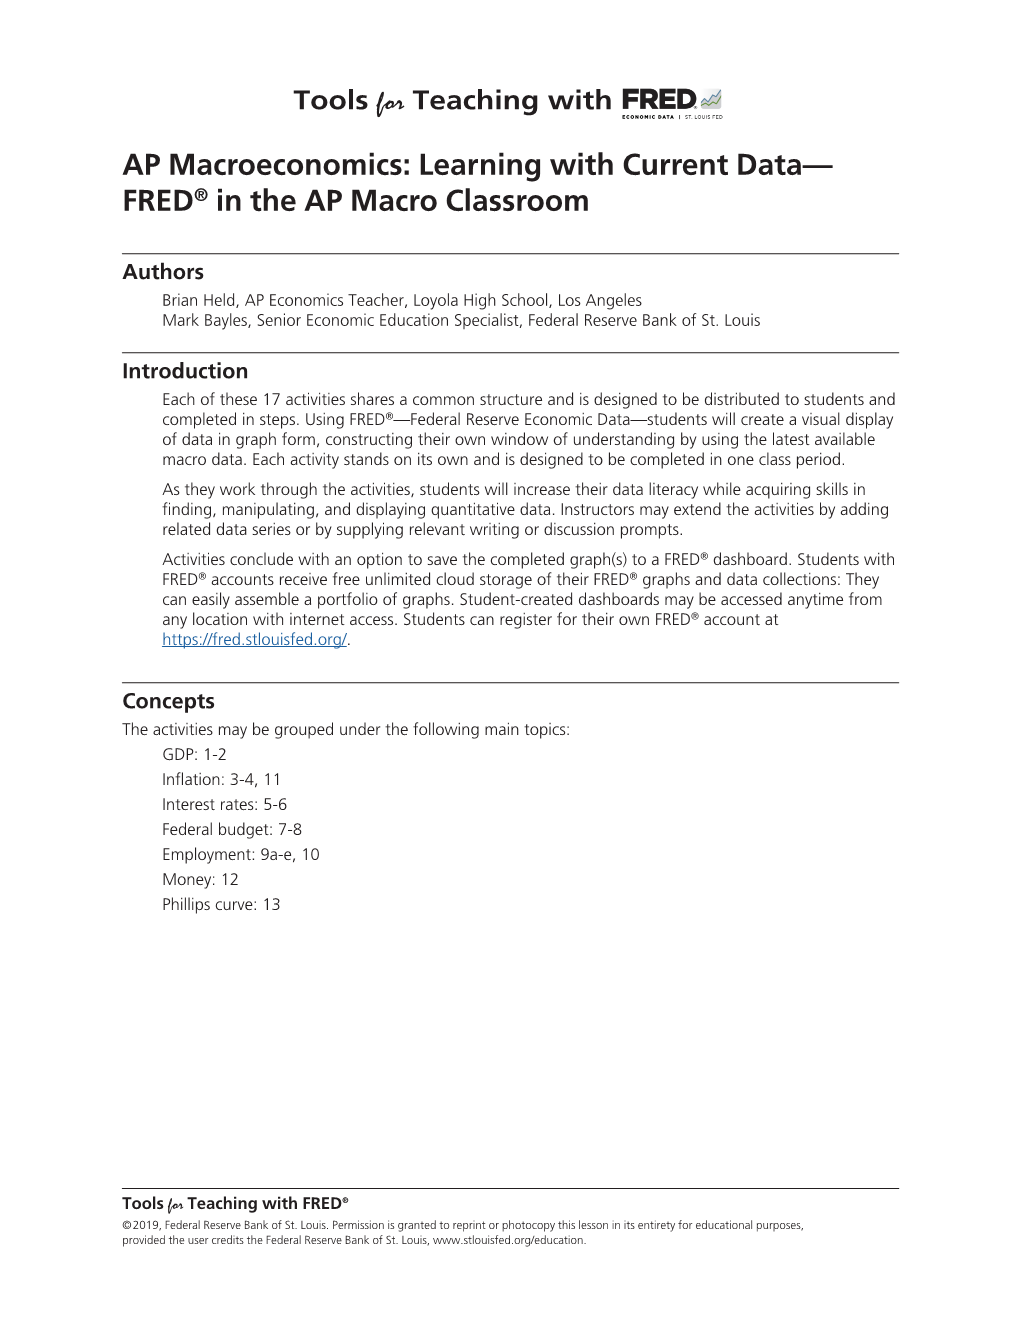 AP Macroeconomics: Learning with Current Data— FRED® in the AP Macro Classroom